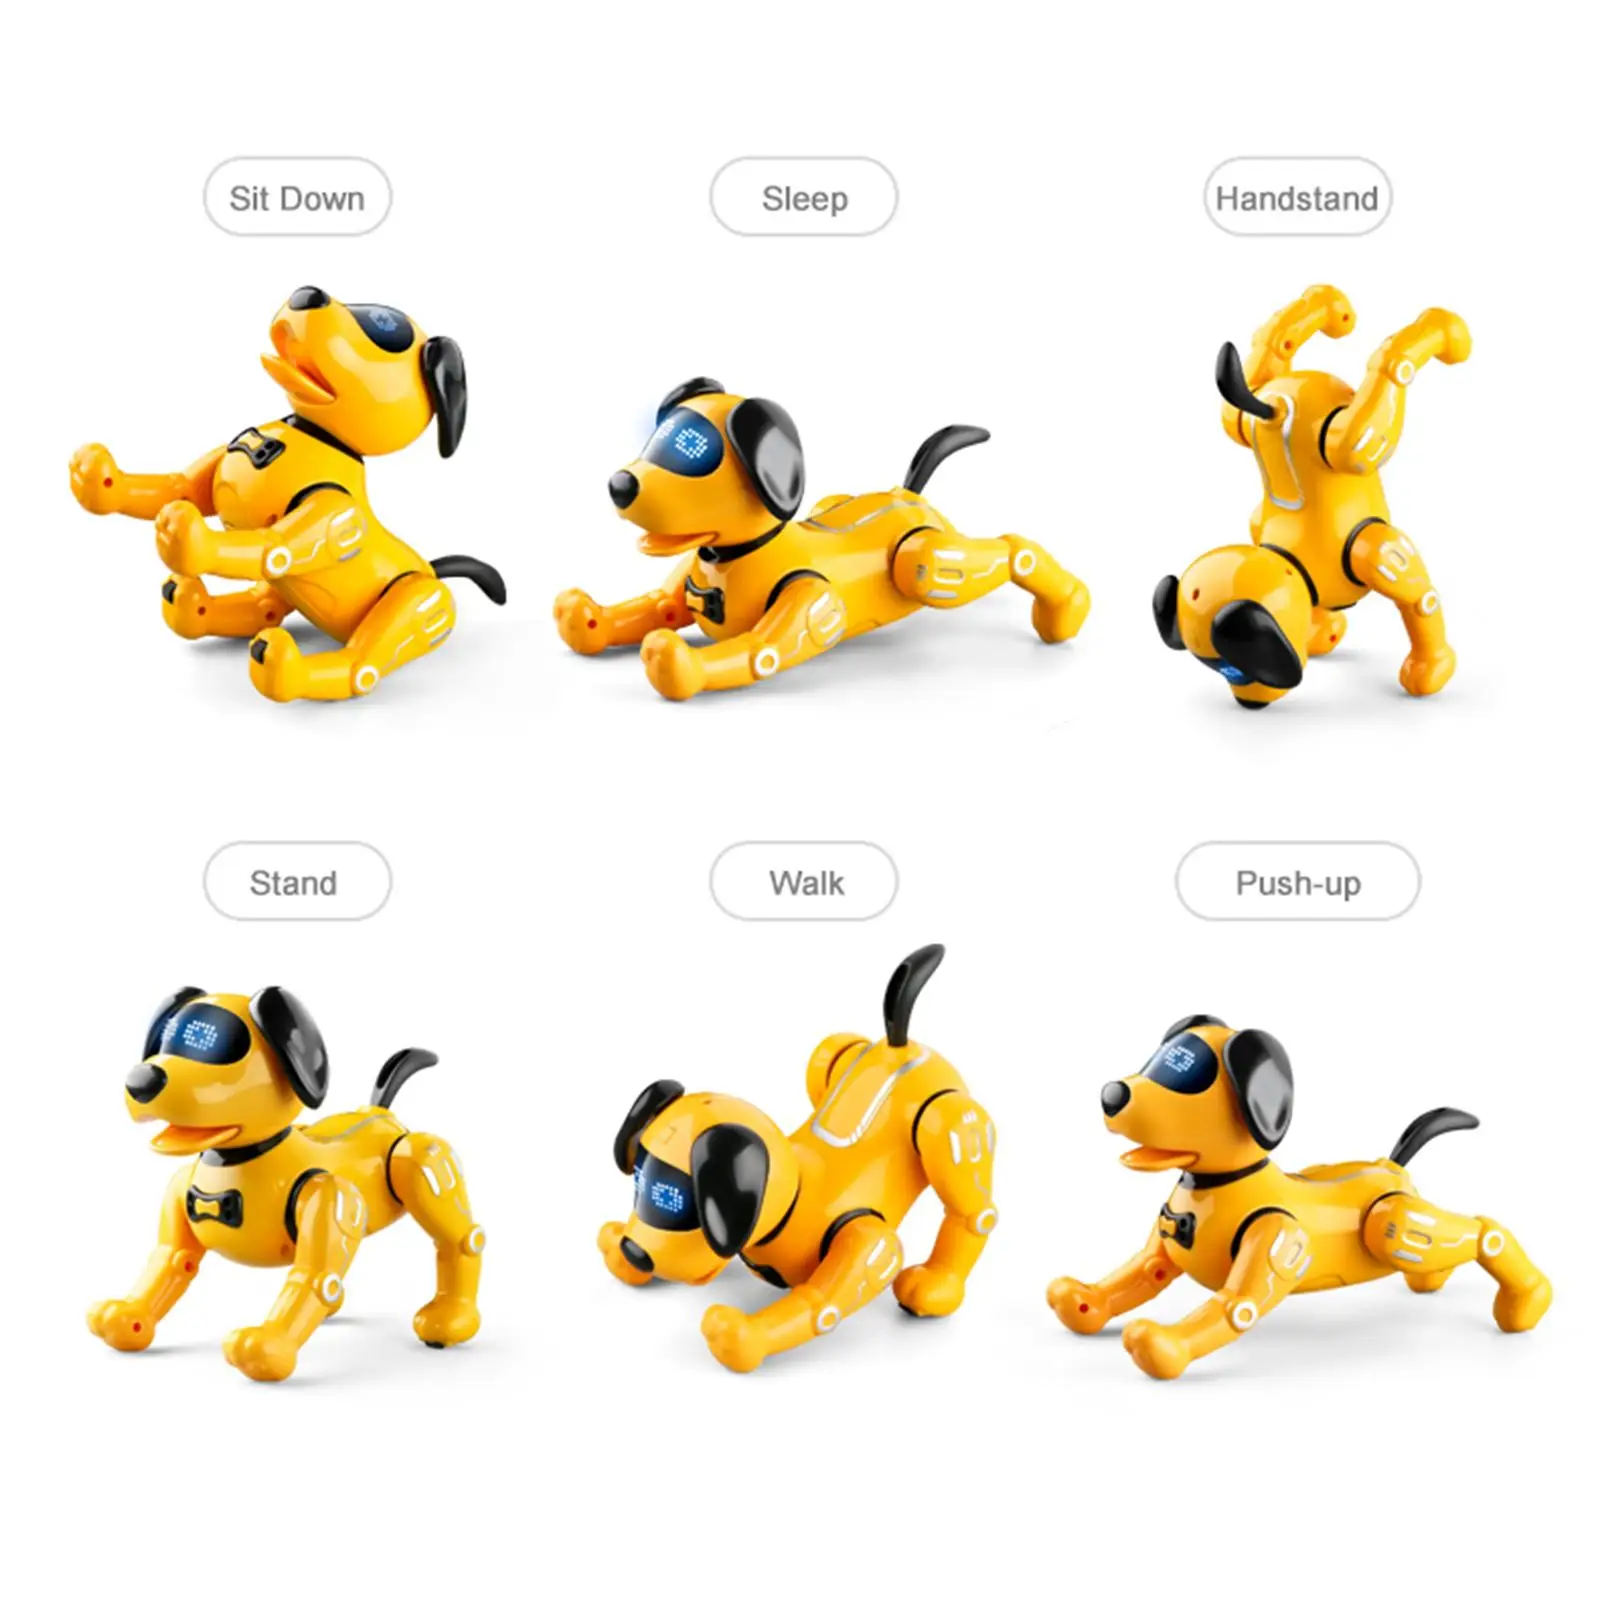 Remote Control Robot Dog Push up Dancing interactive Robotic Pet RC Robot Dog Robot Dog Toy for Children Boys and Girls